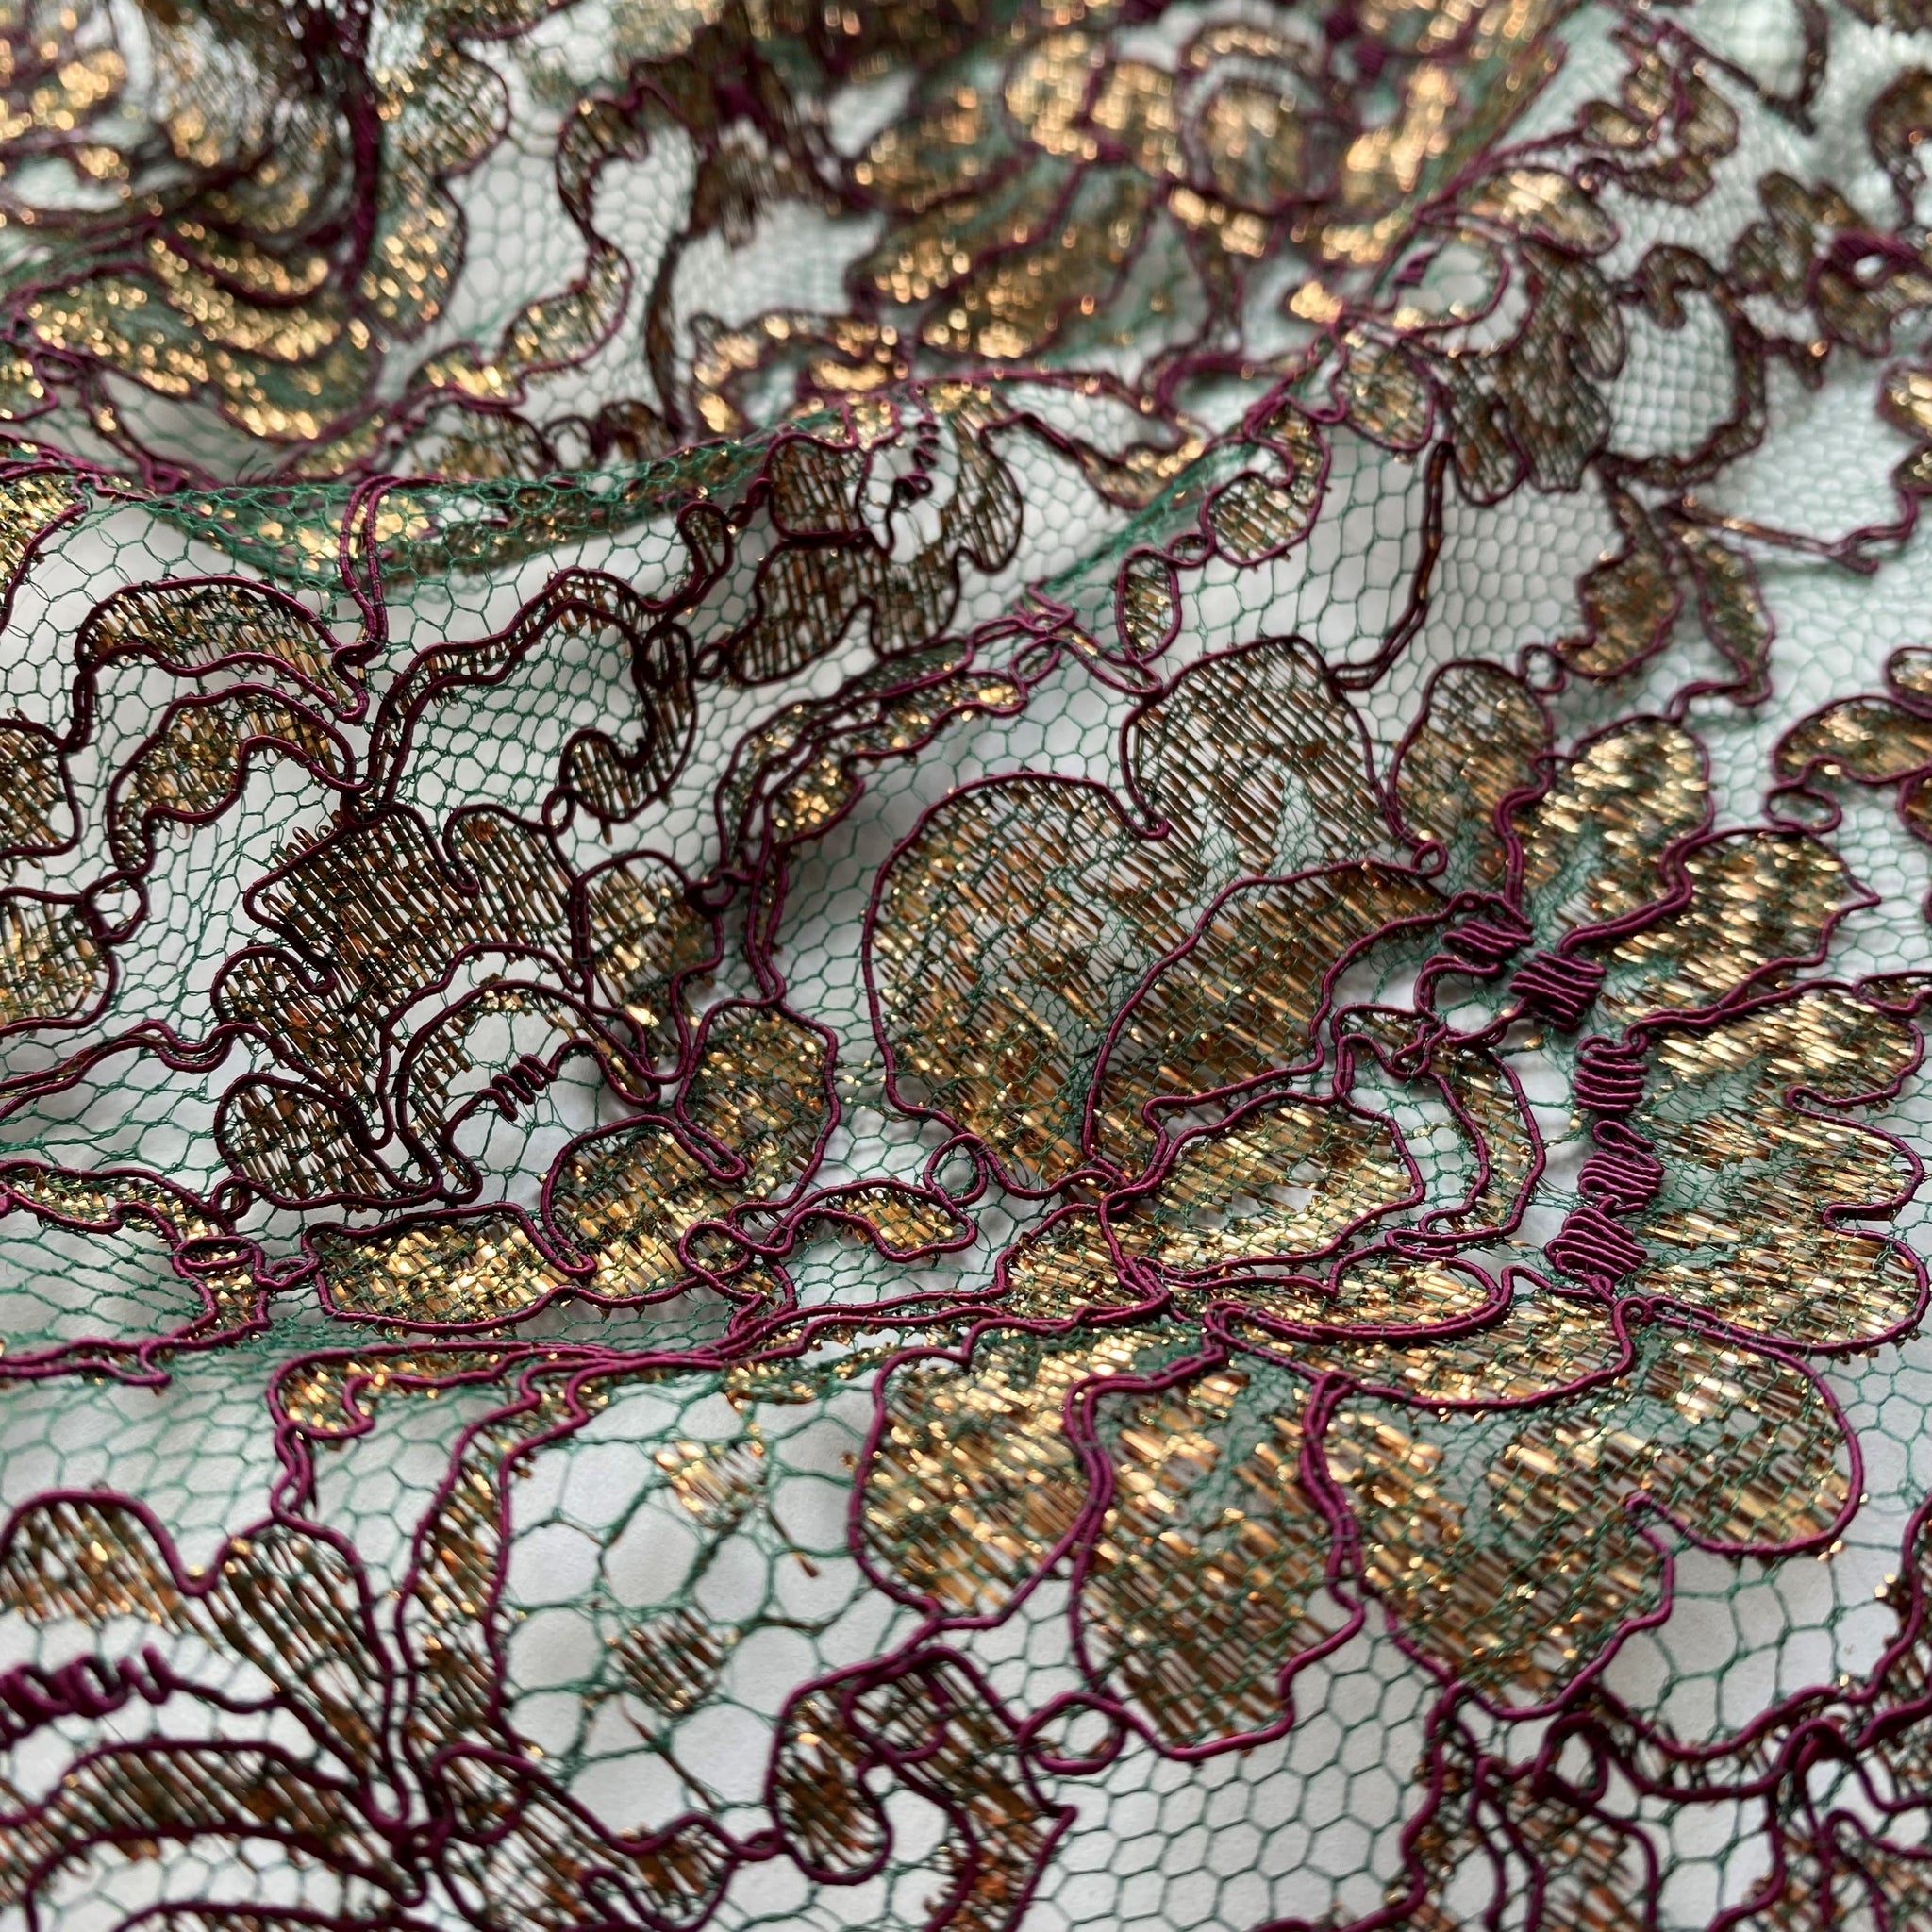 Lace Fabric: Fabrics from France by Solstiss, SKU 00072587 at $130